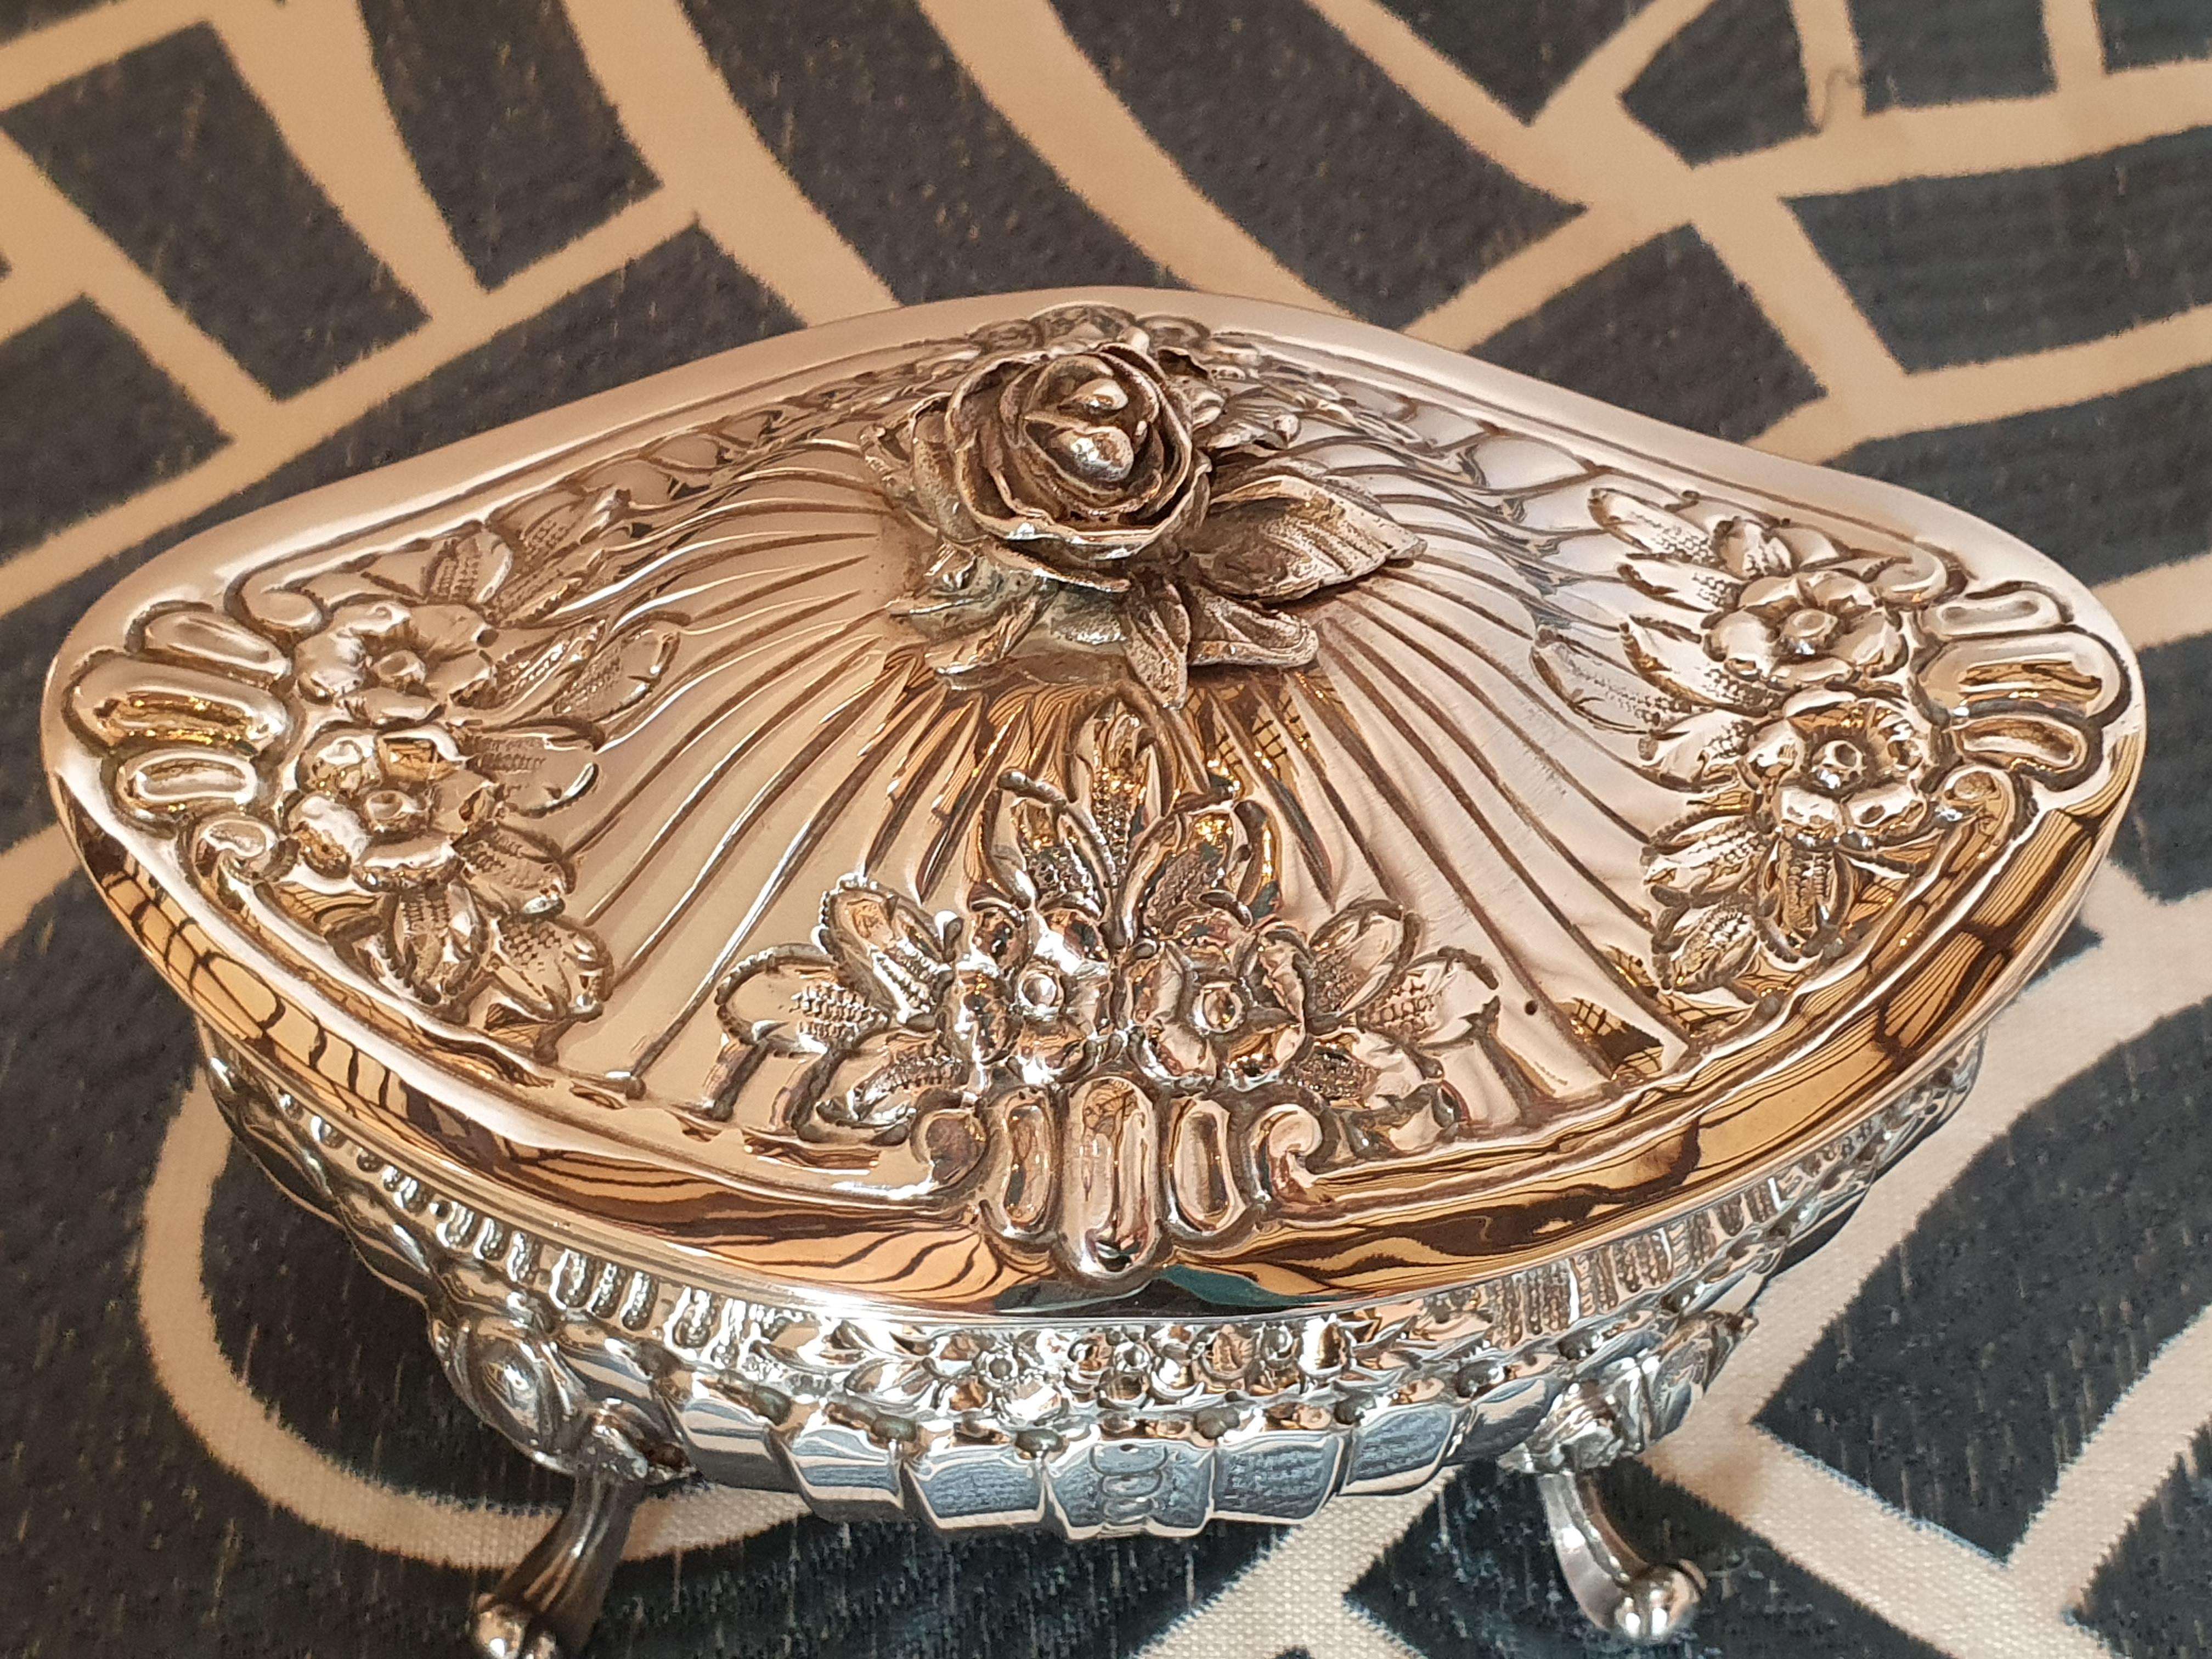 A stunning handmade sterling silver sugar box. Beautiful chisel work reproducing the Classic shape of the 18th century Turin sugar box, the knob represents a rose in an extremely realistic way.
A significant example of the skill of the Italian